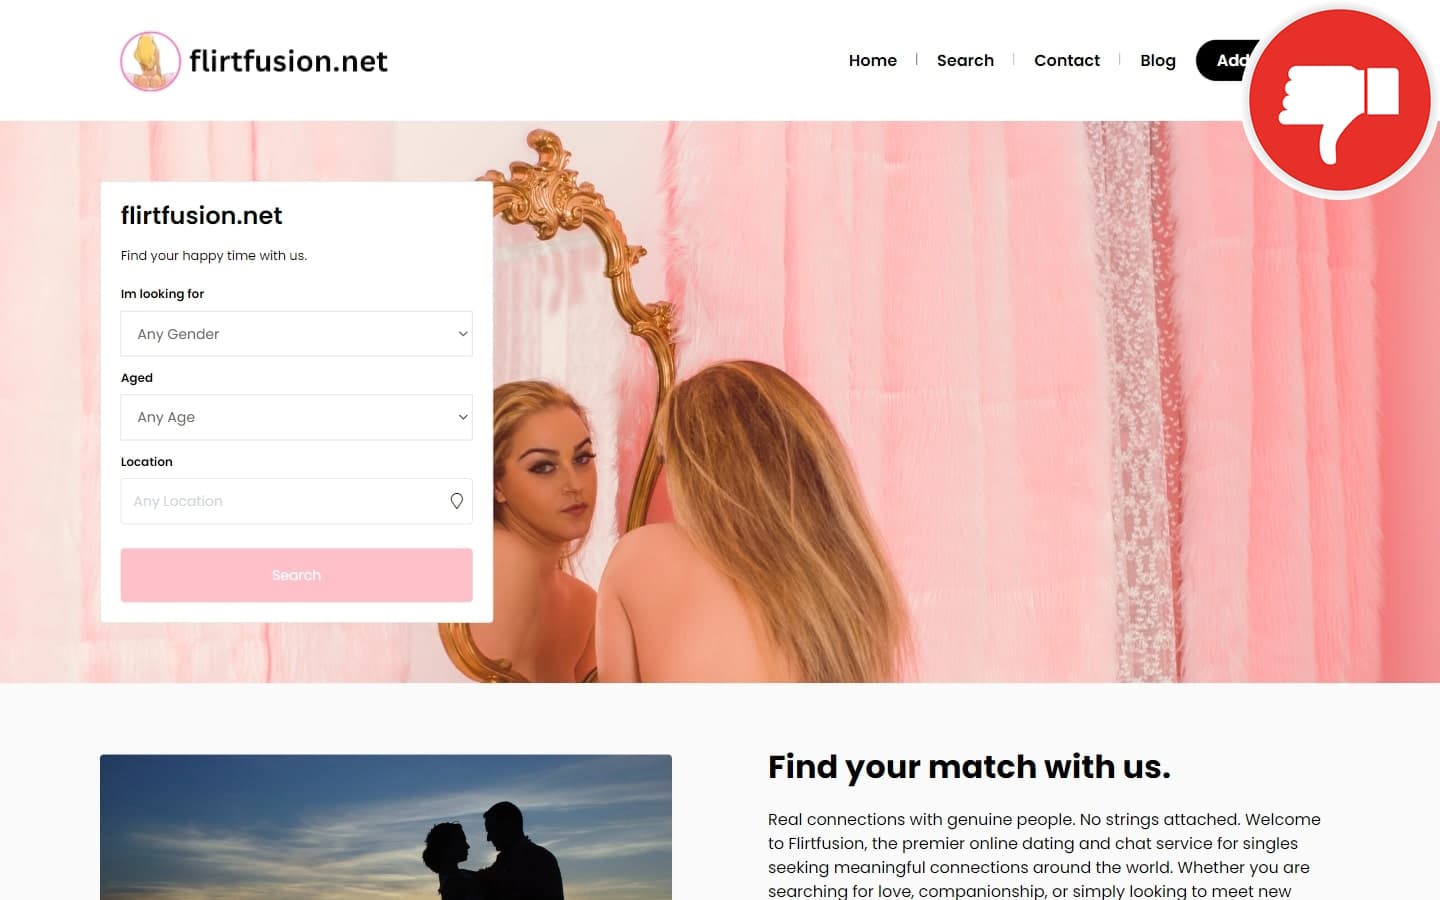 Review FlirtFusion.net scam experience